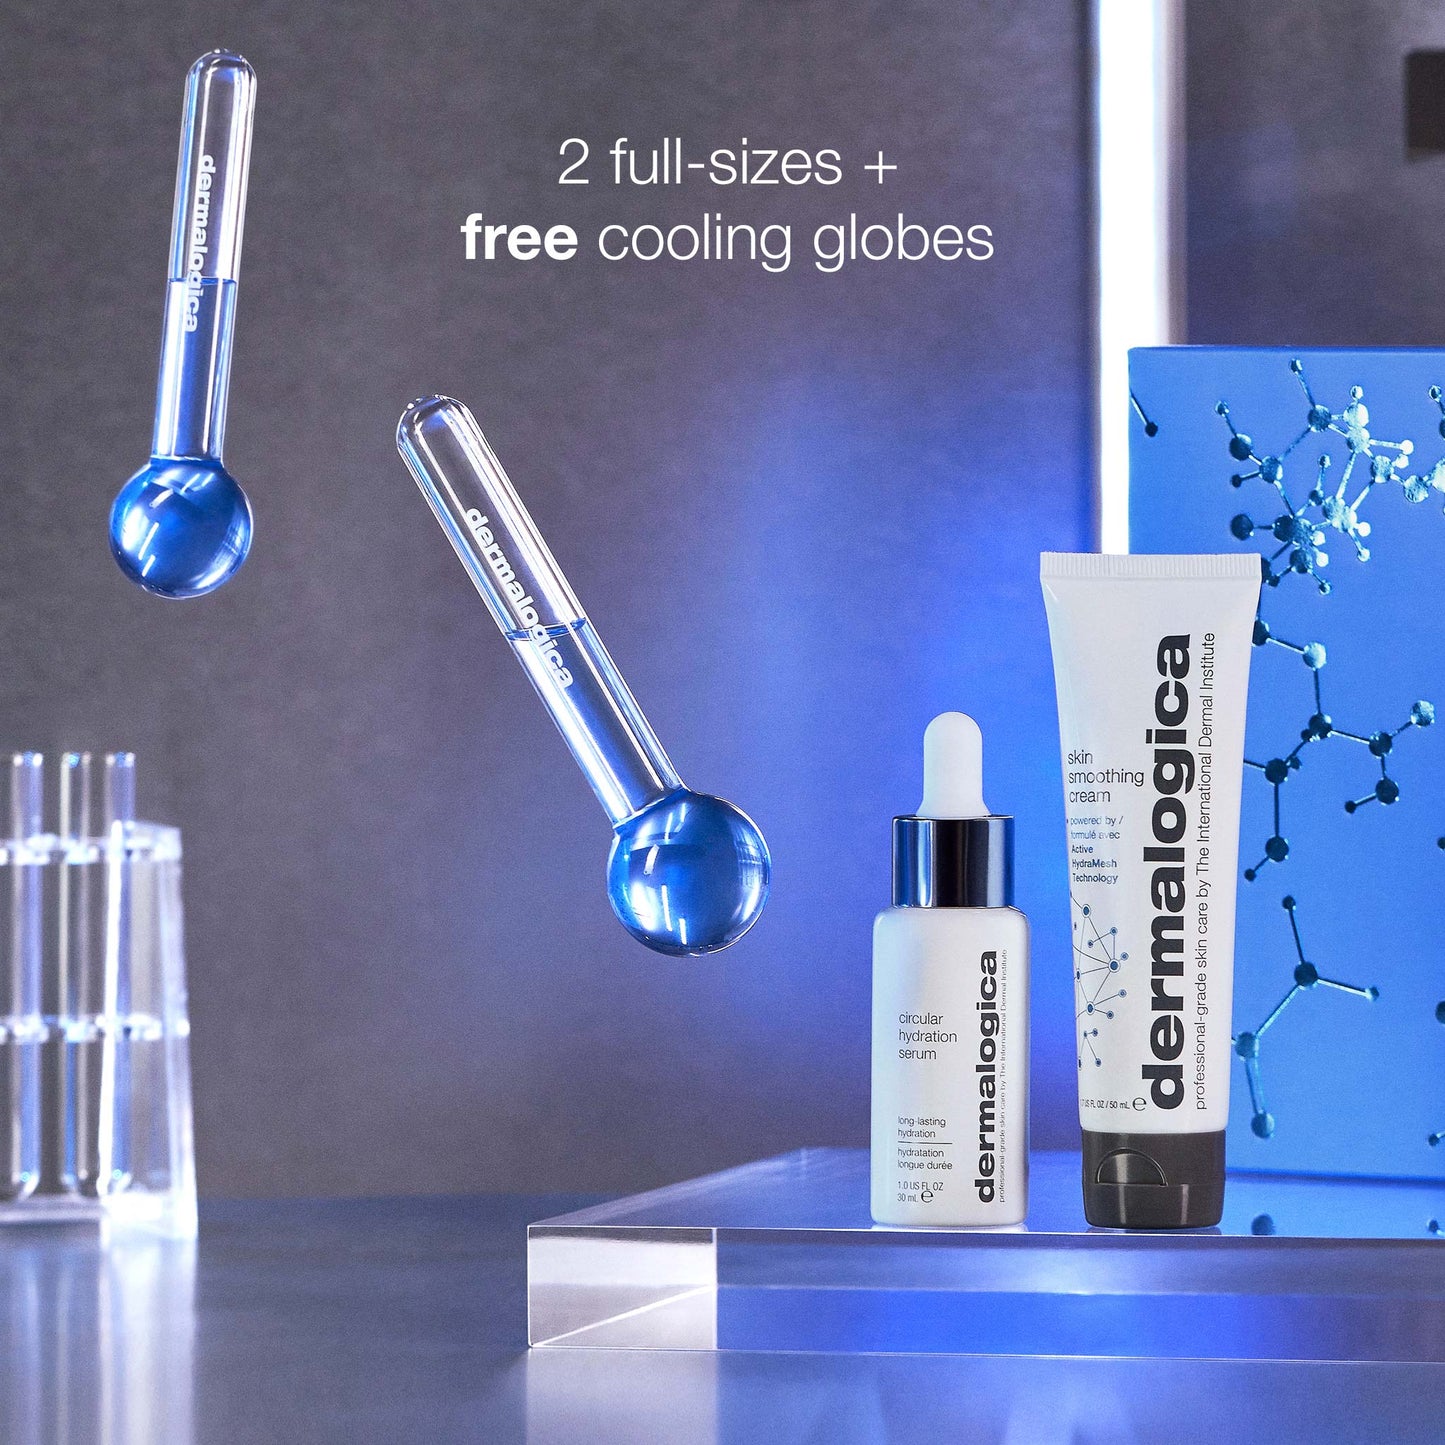 image of the 2 free cooling globes and product